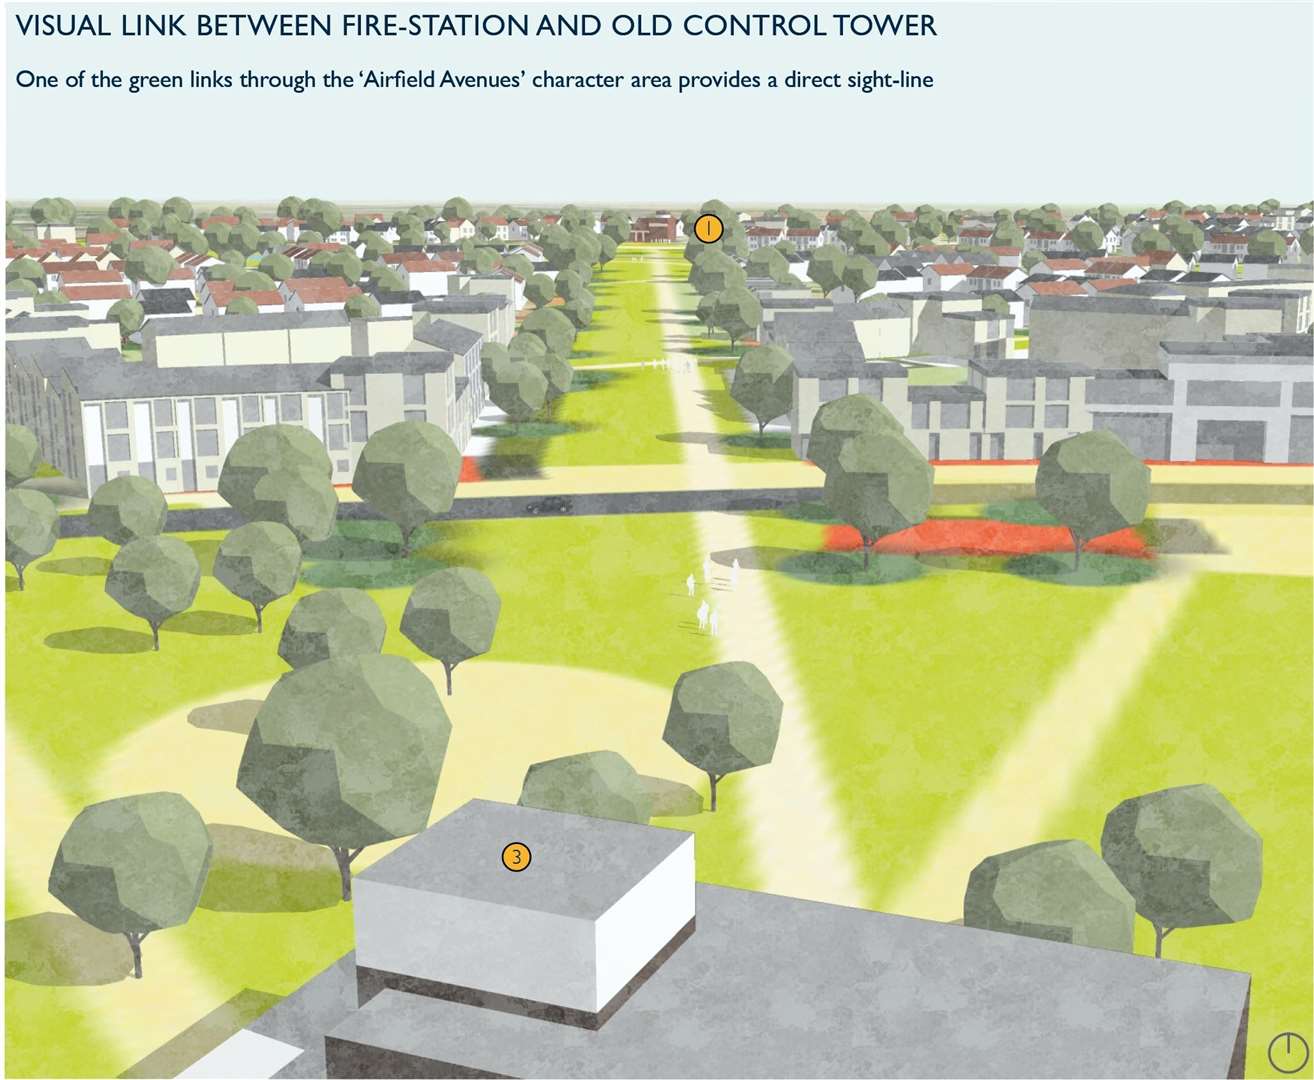 Artists impressions released by Stone Hill Park revealed their vision for housing and business at Manston